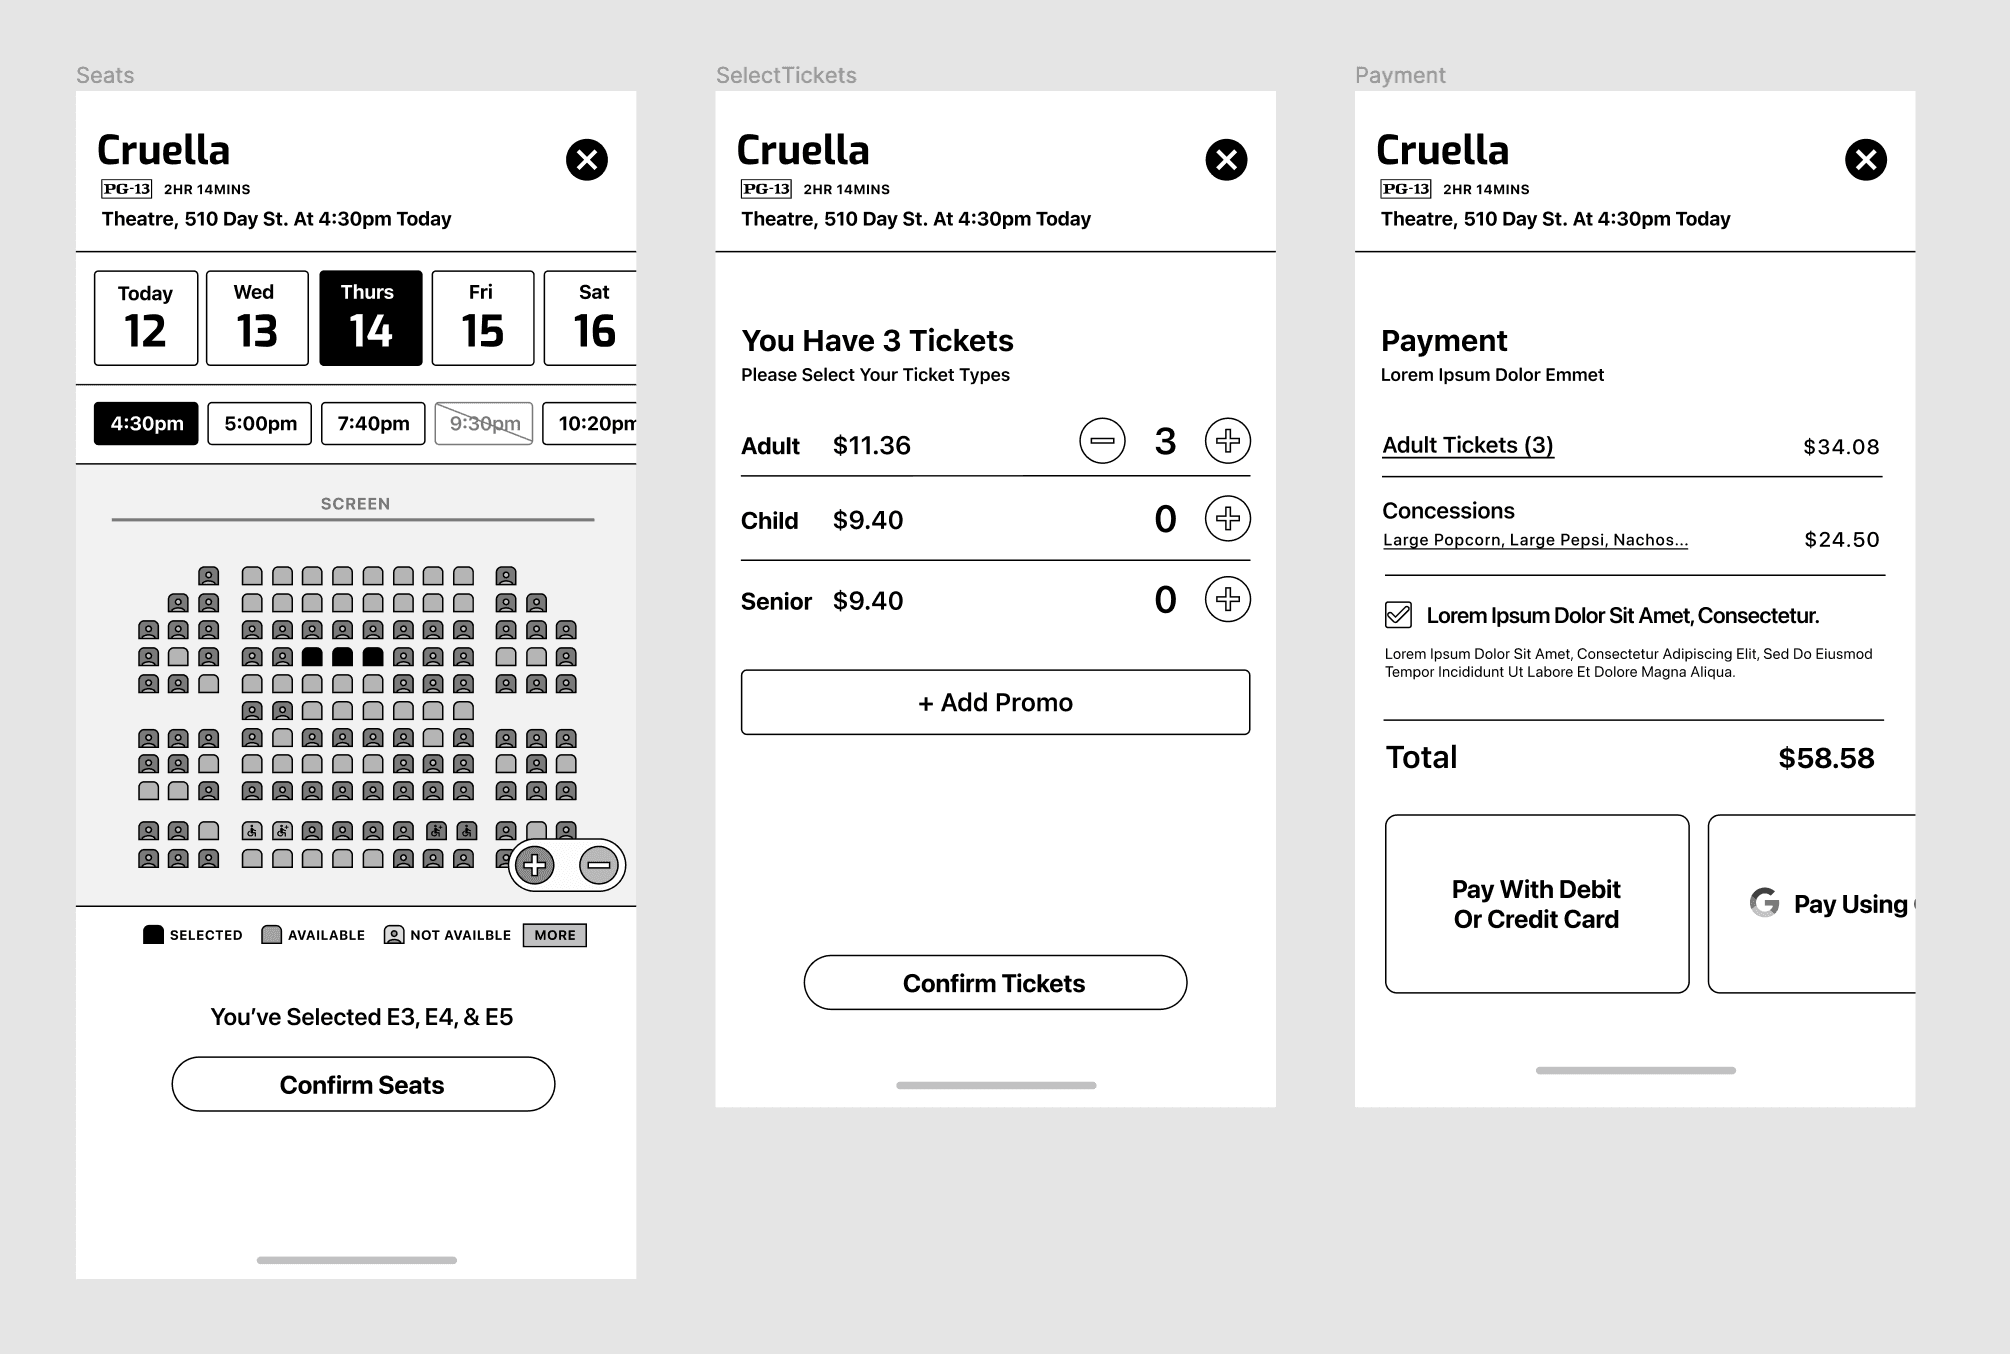 Seat map and selection screens